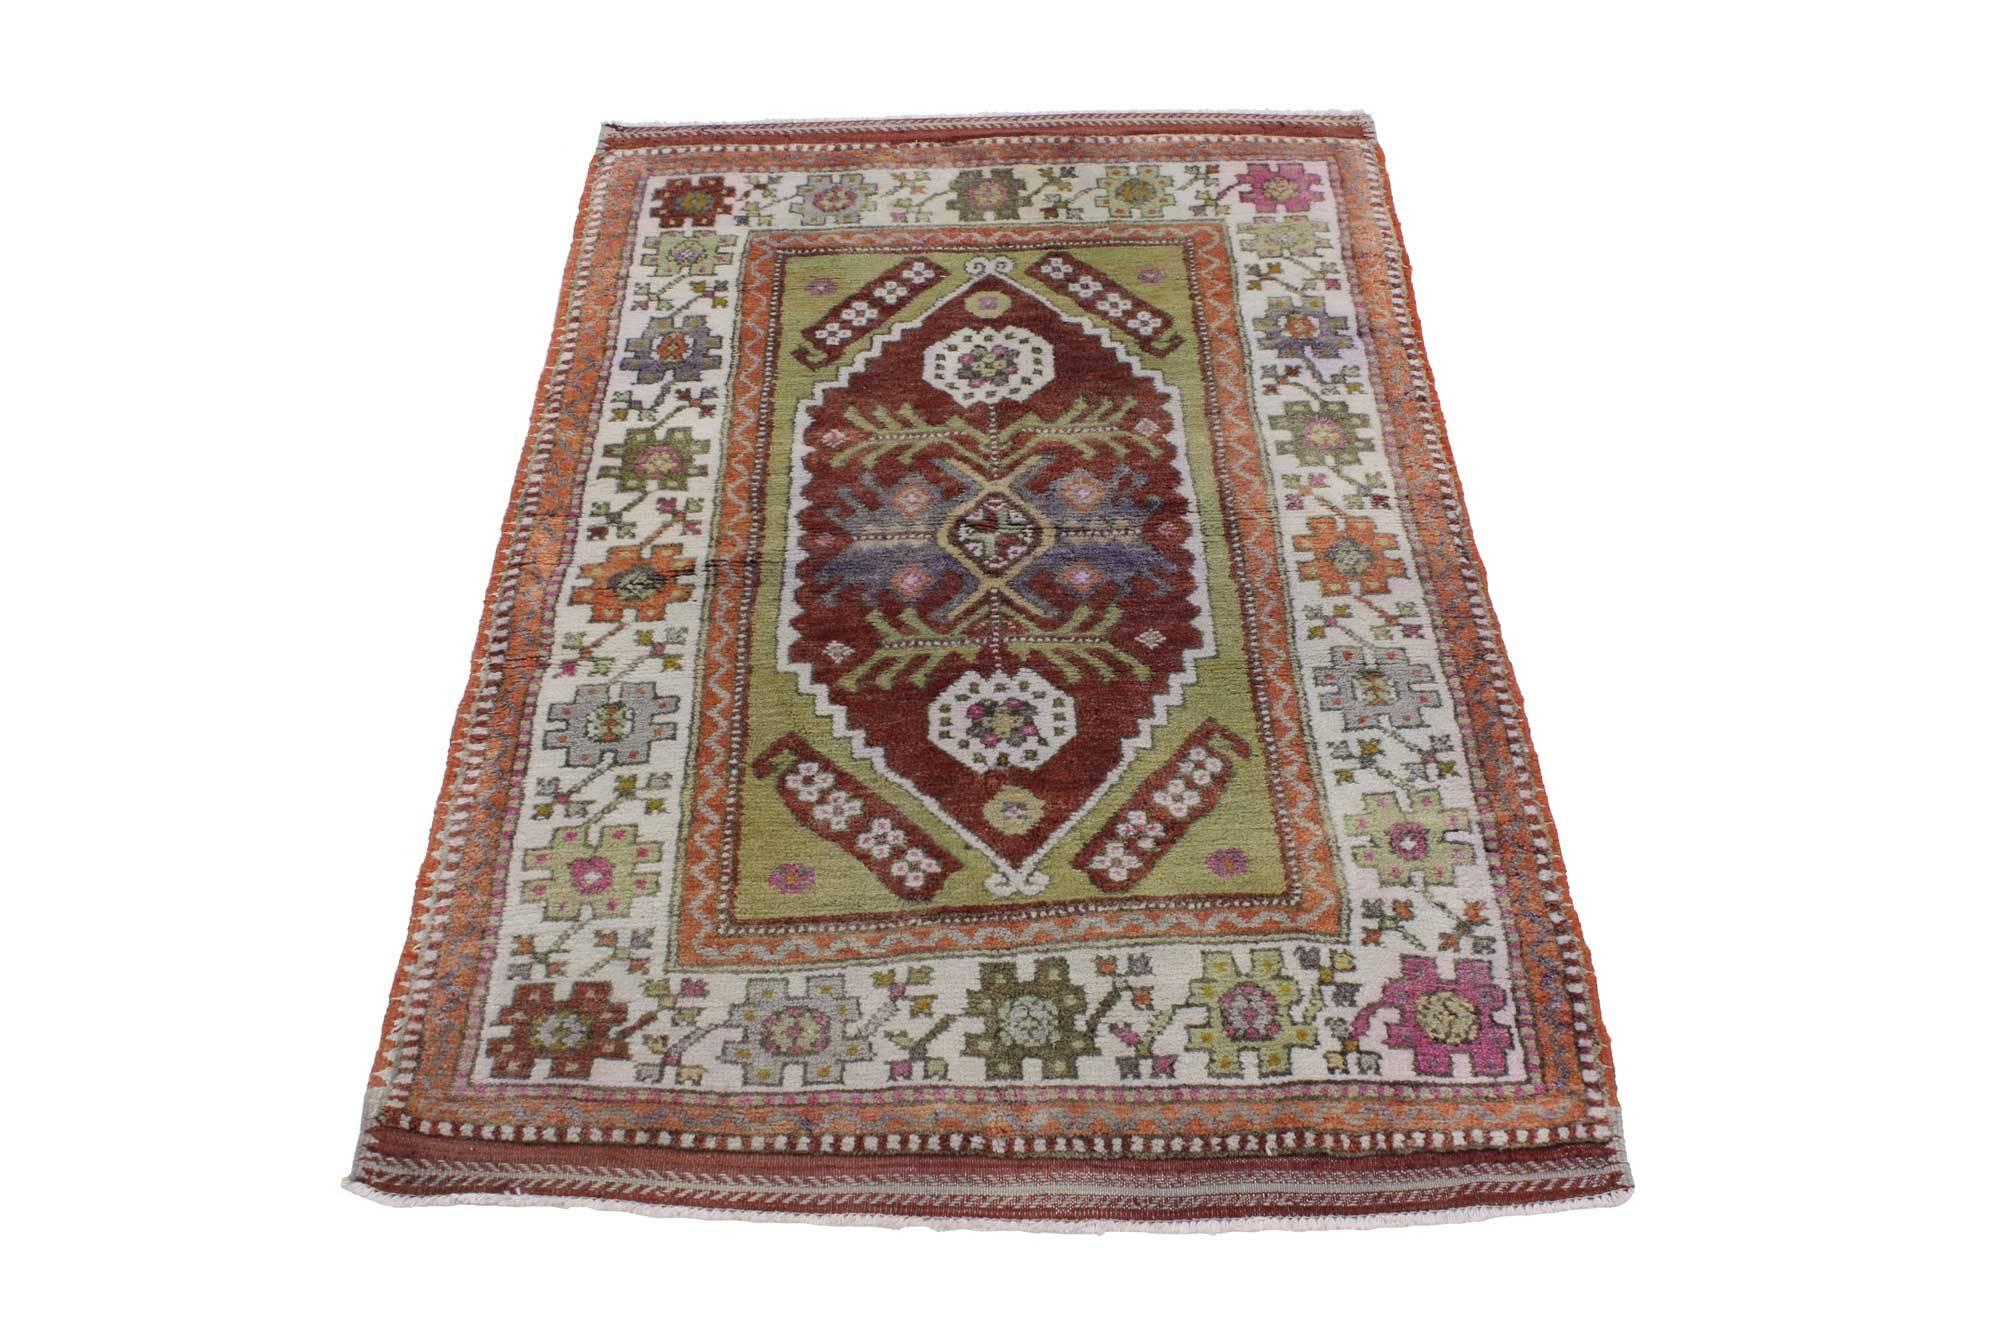 51755, vintage Turkish Oushak rug, colorful rug for kitchen, bath, foyer or entryway. This hand-knotted wool vintage Turkish Oushak rug features a modern traditional style. Immersed in Anatolian history and refined colors, this vintage Oushak rug